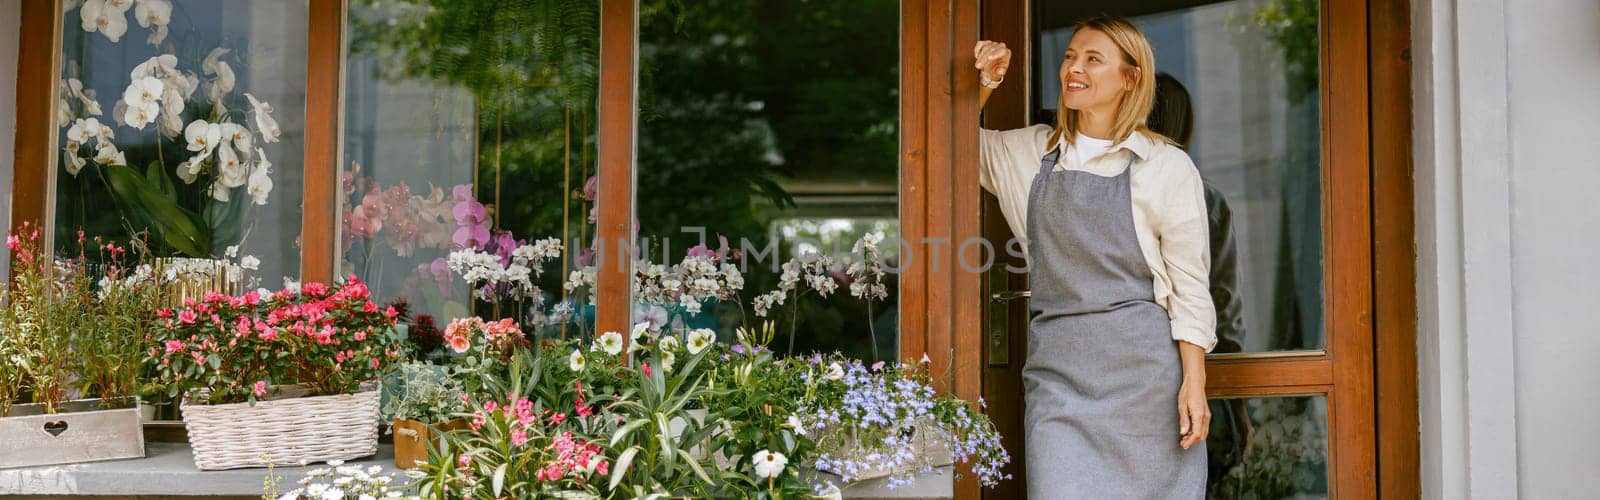 Professional woman gardener small business owner standing in own floral store and waiting for client by Yaroslav_astakhov